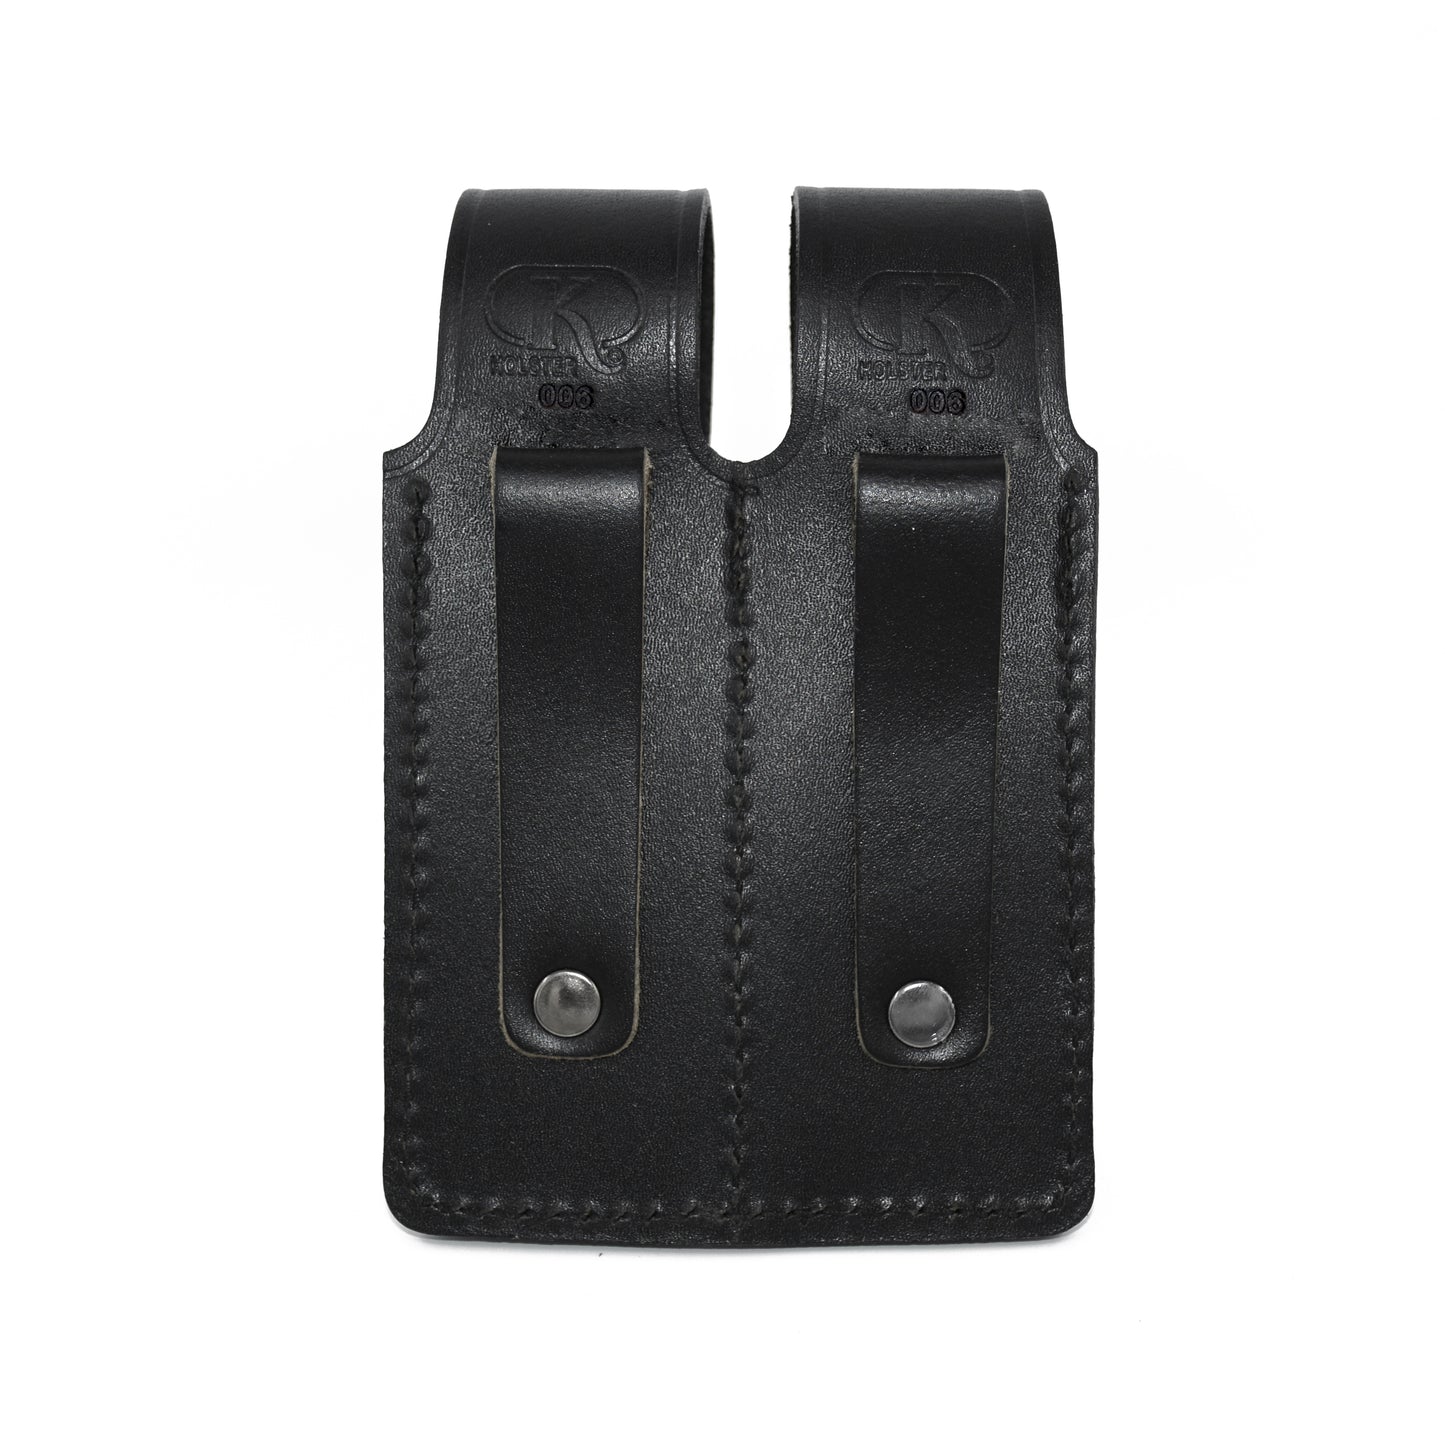 Double Magazine Pouch/Carrier/case for Beretta, Taurus, CZ 75, Leather Handmade! (ALIS006)